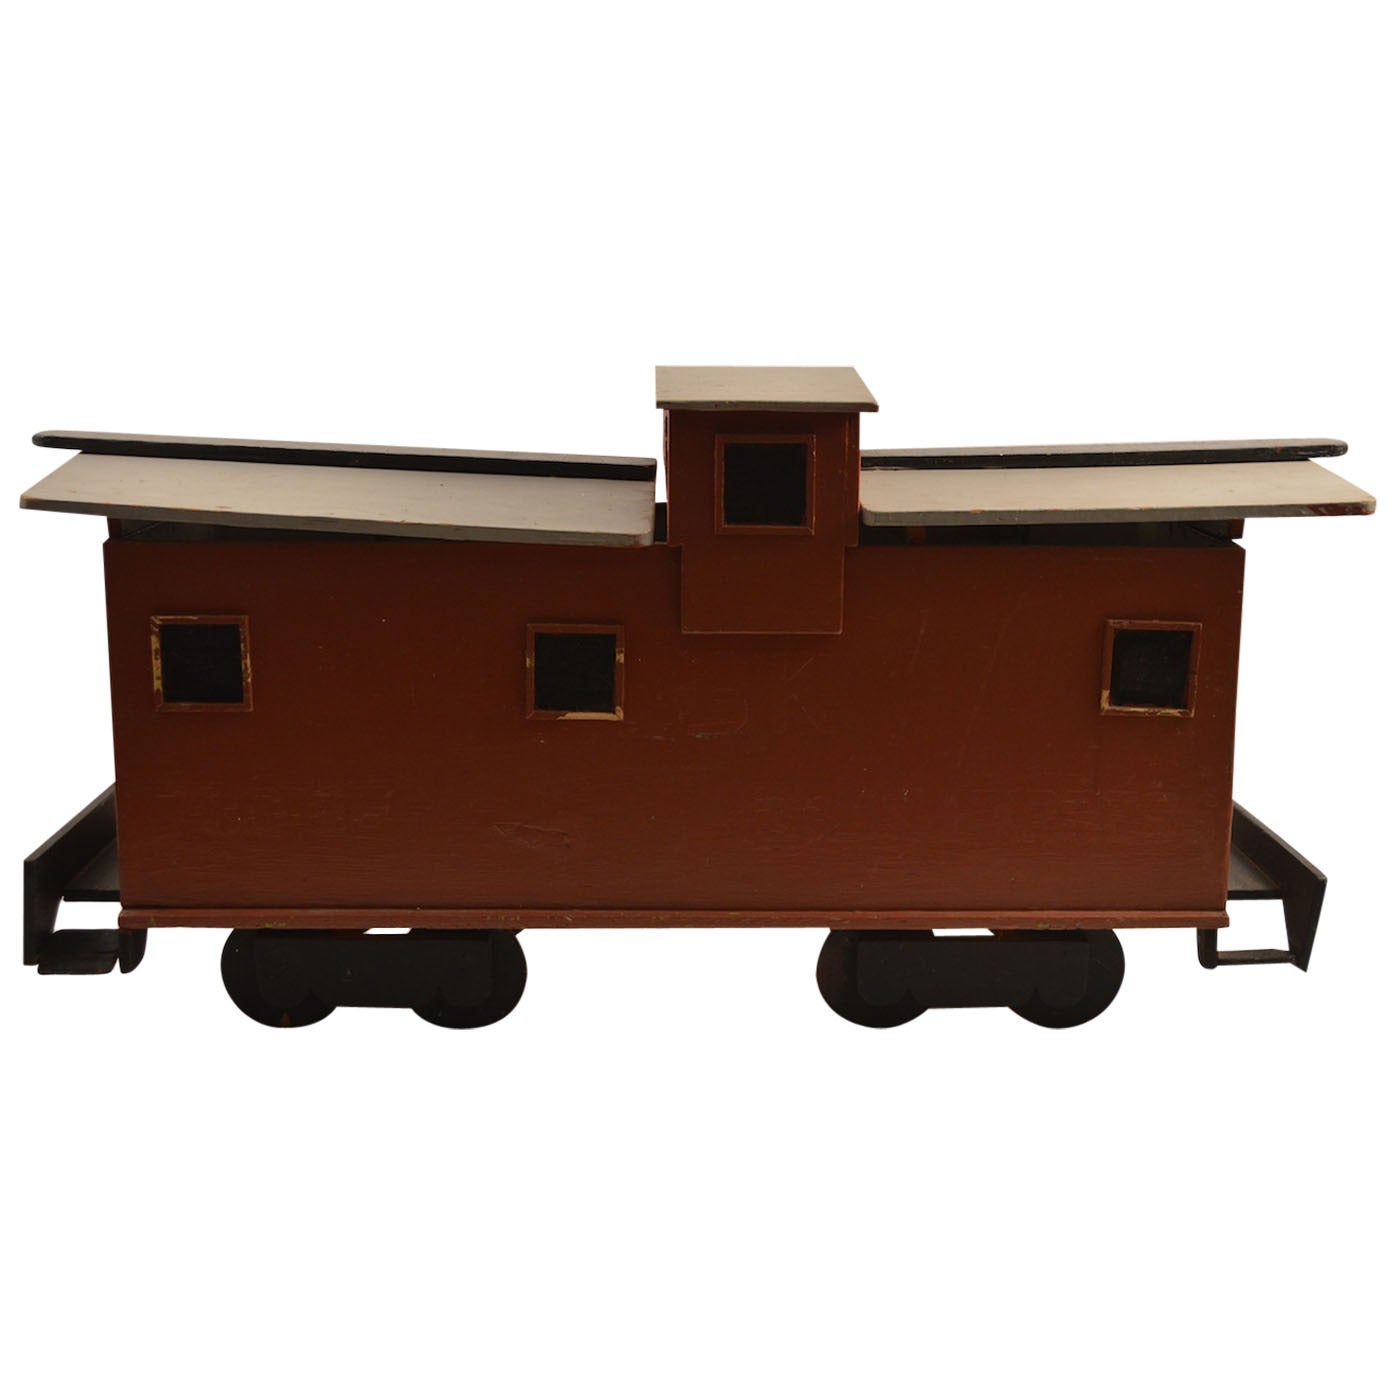 Large Folky Handmade Caboose-Form Toy Box For Sale